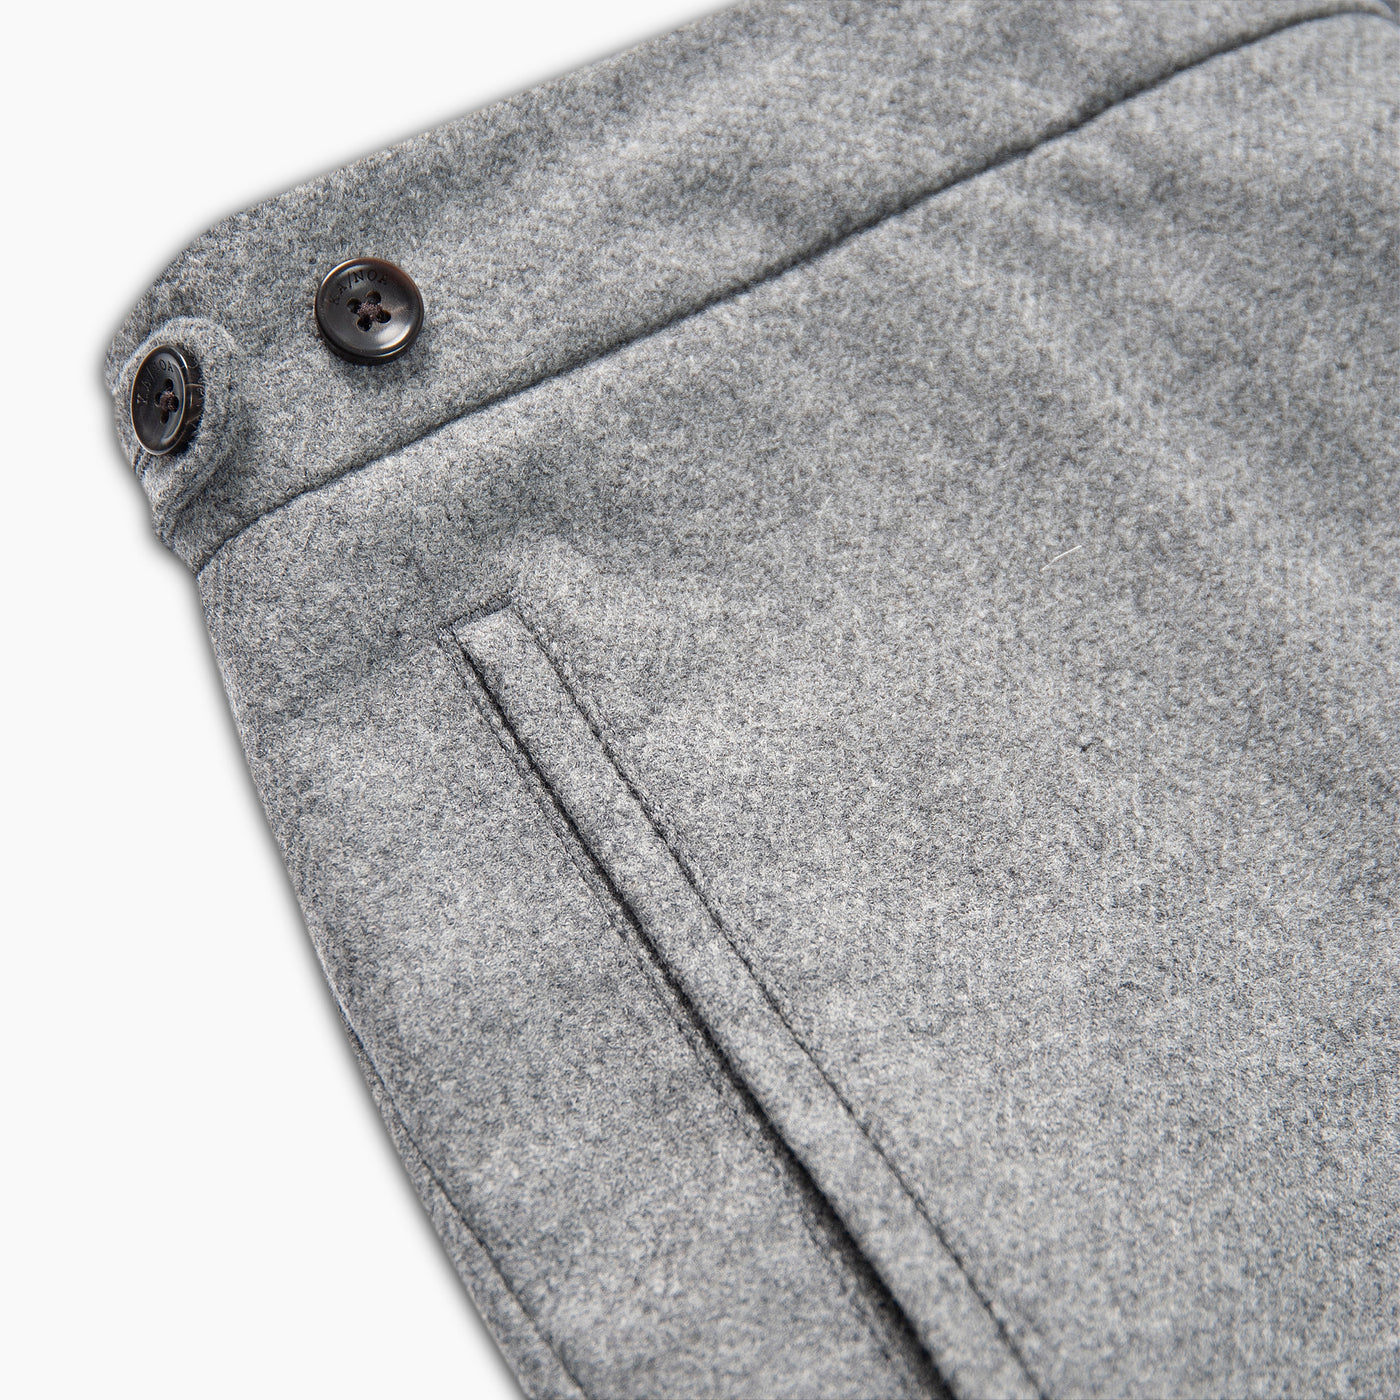 Vince easy pants Honey Way wool cashmere flannel